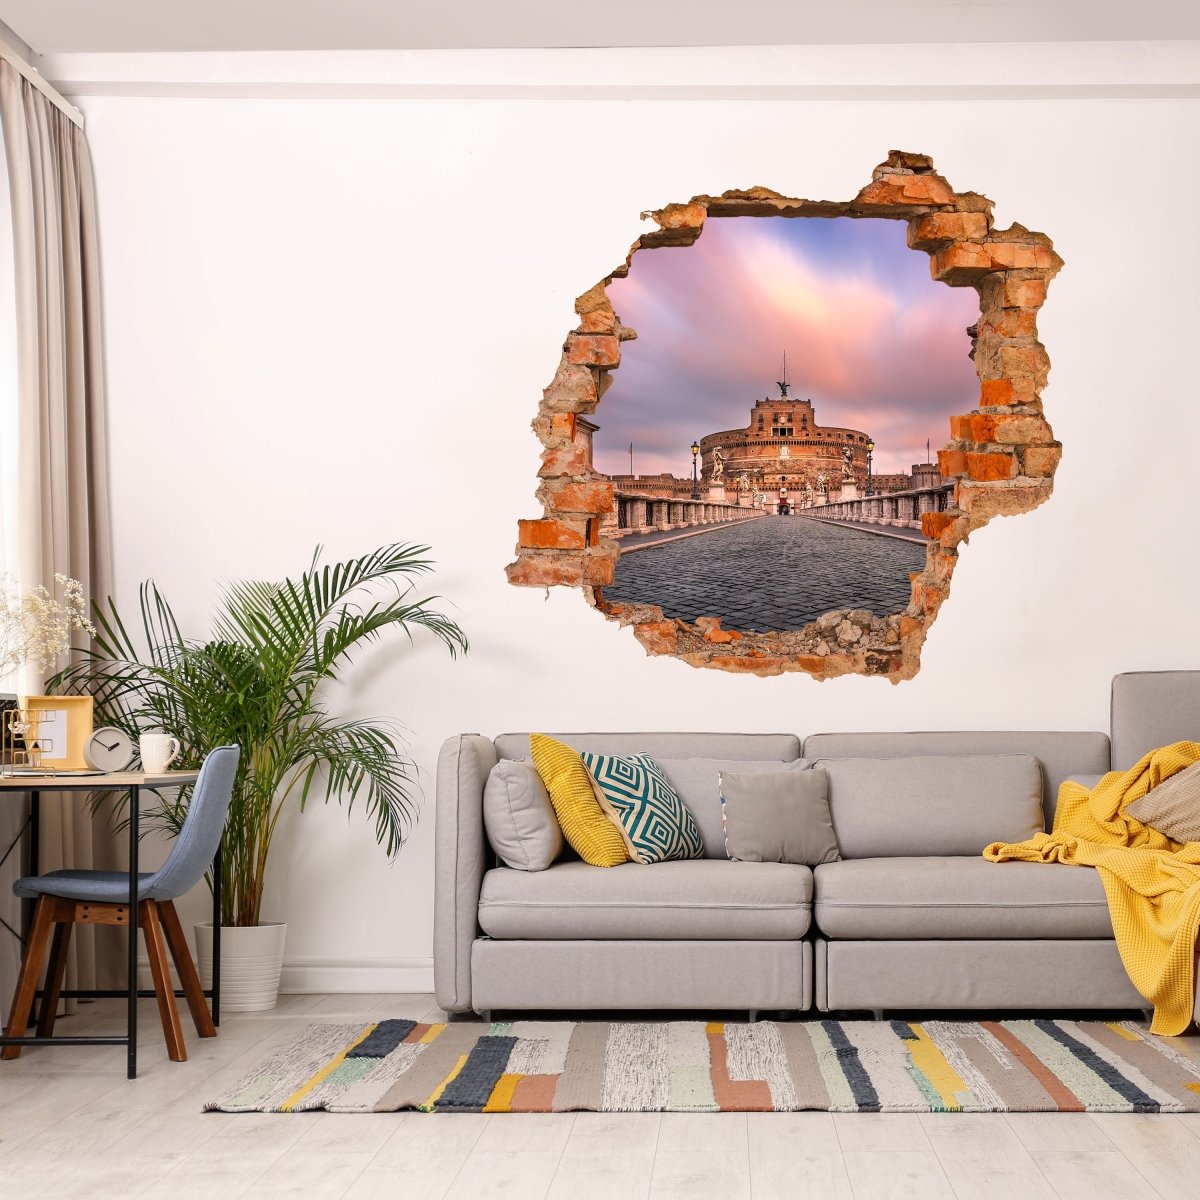 3D wall sticker Sant Angelo Bridge and Castle, Rome - Wall Decal M1035